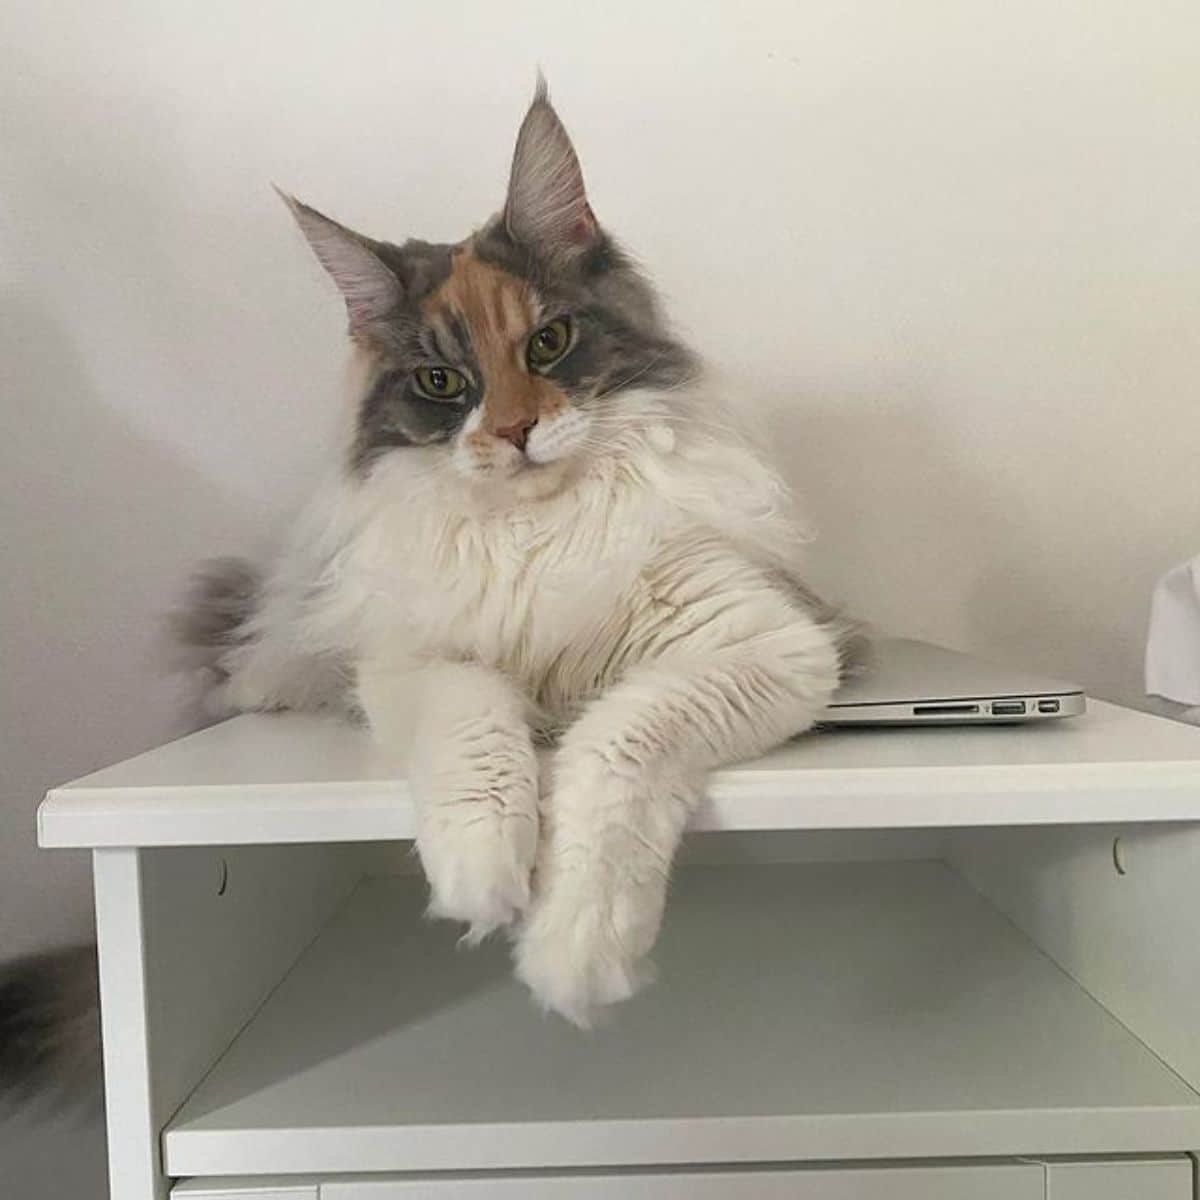 A fluffy calico maine coon lying on a white furniture near a notebook.